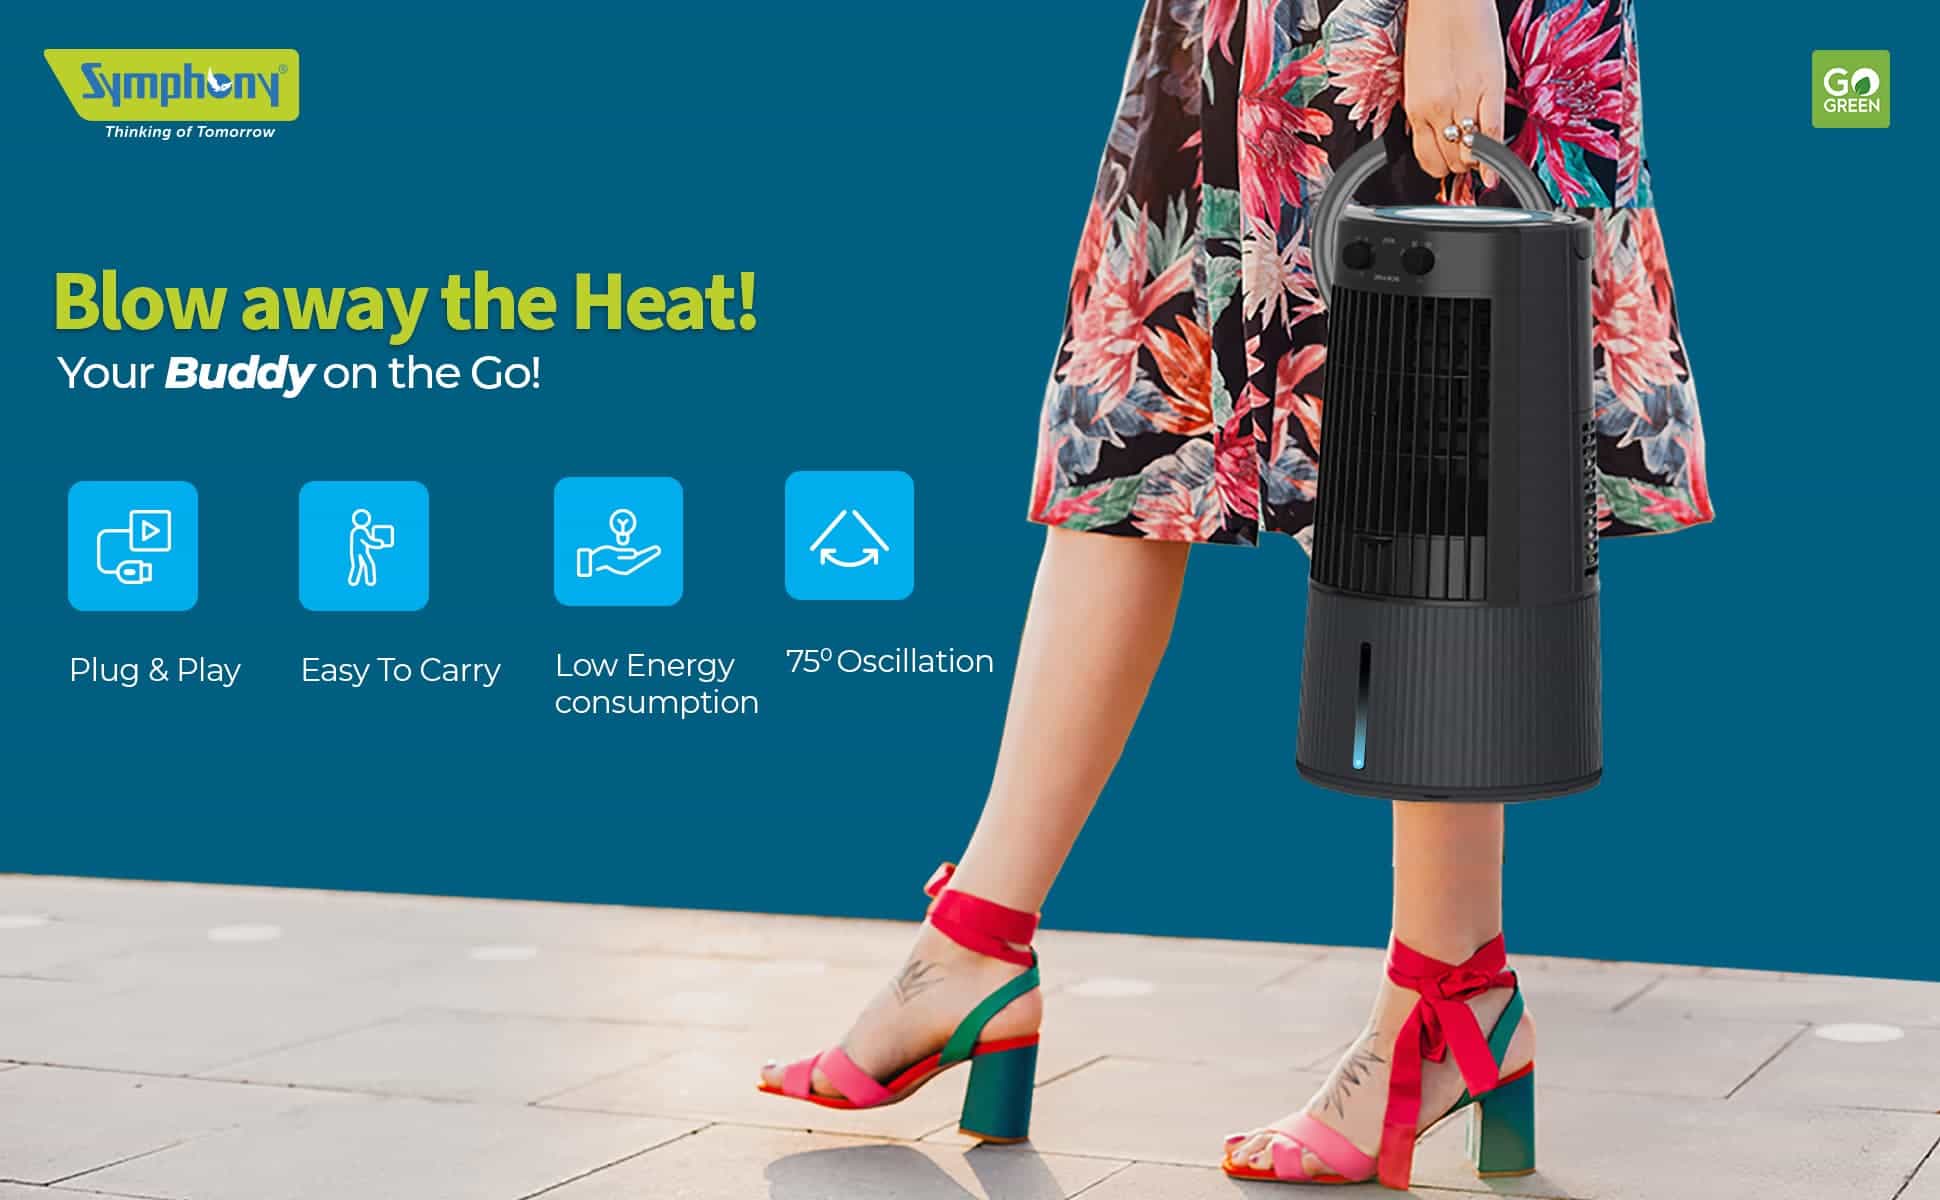 Symphony Duet – Blow away the Heat! Your Buddy on the Go! Plug & Play - Easy To Carry - Low Energy consumption - 75° Oscillation